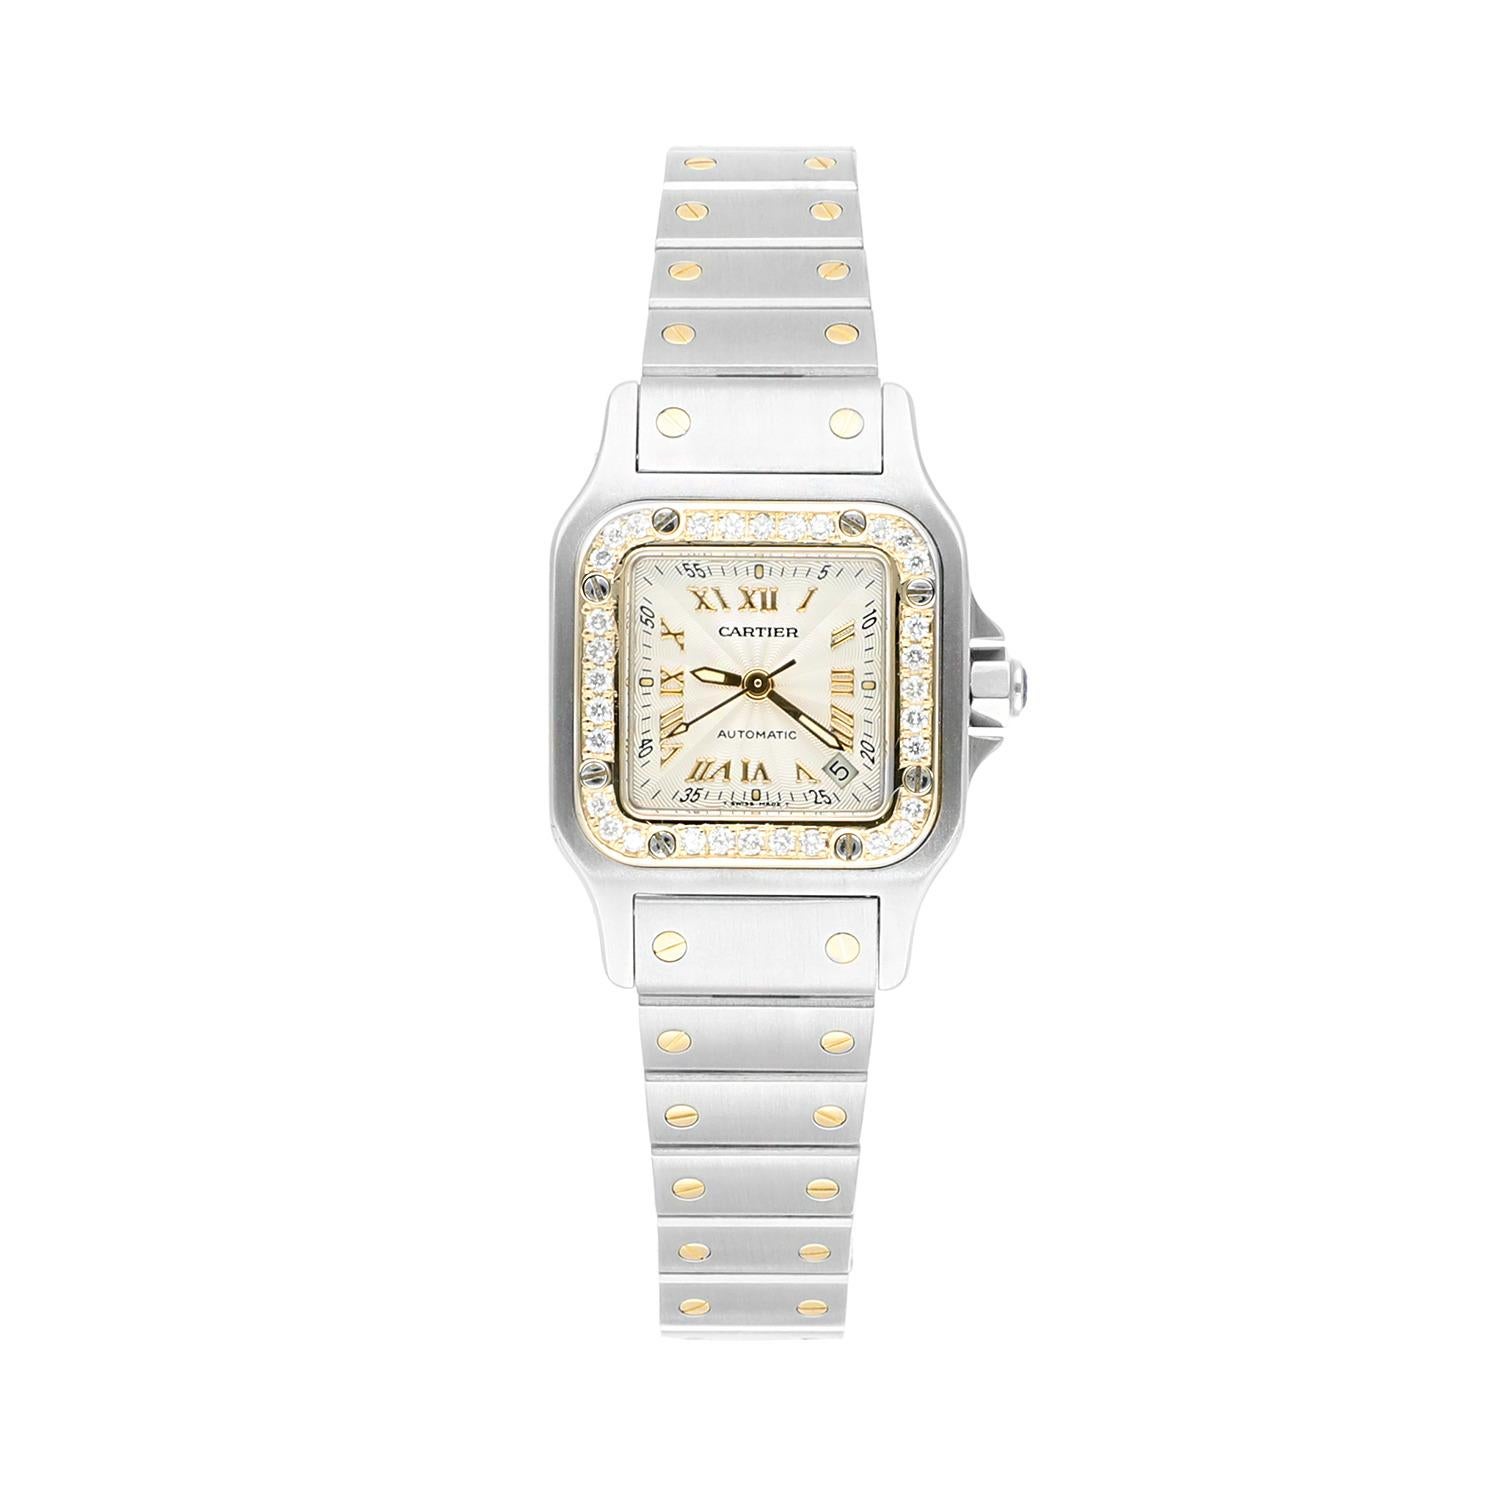 Cartier Santos Galbee 24 mm Women's Two Tone Yellow Gold 2423 Watch Custom Diamonds
This watch has been professionally polished, serviced and is in excellent overall condition. There are absolutely no visible scratches or blemishes. Diamonds were